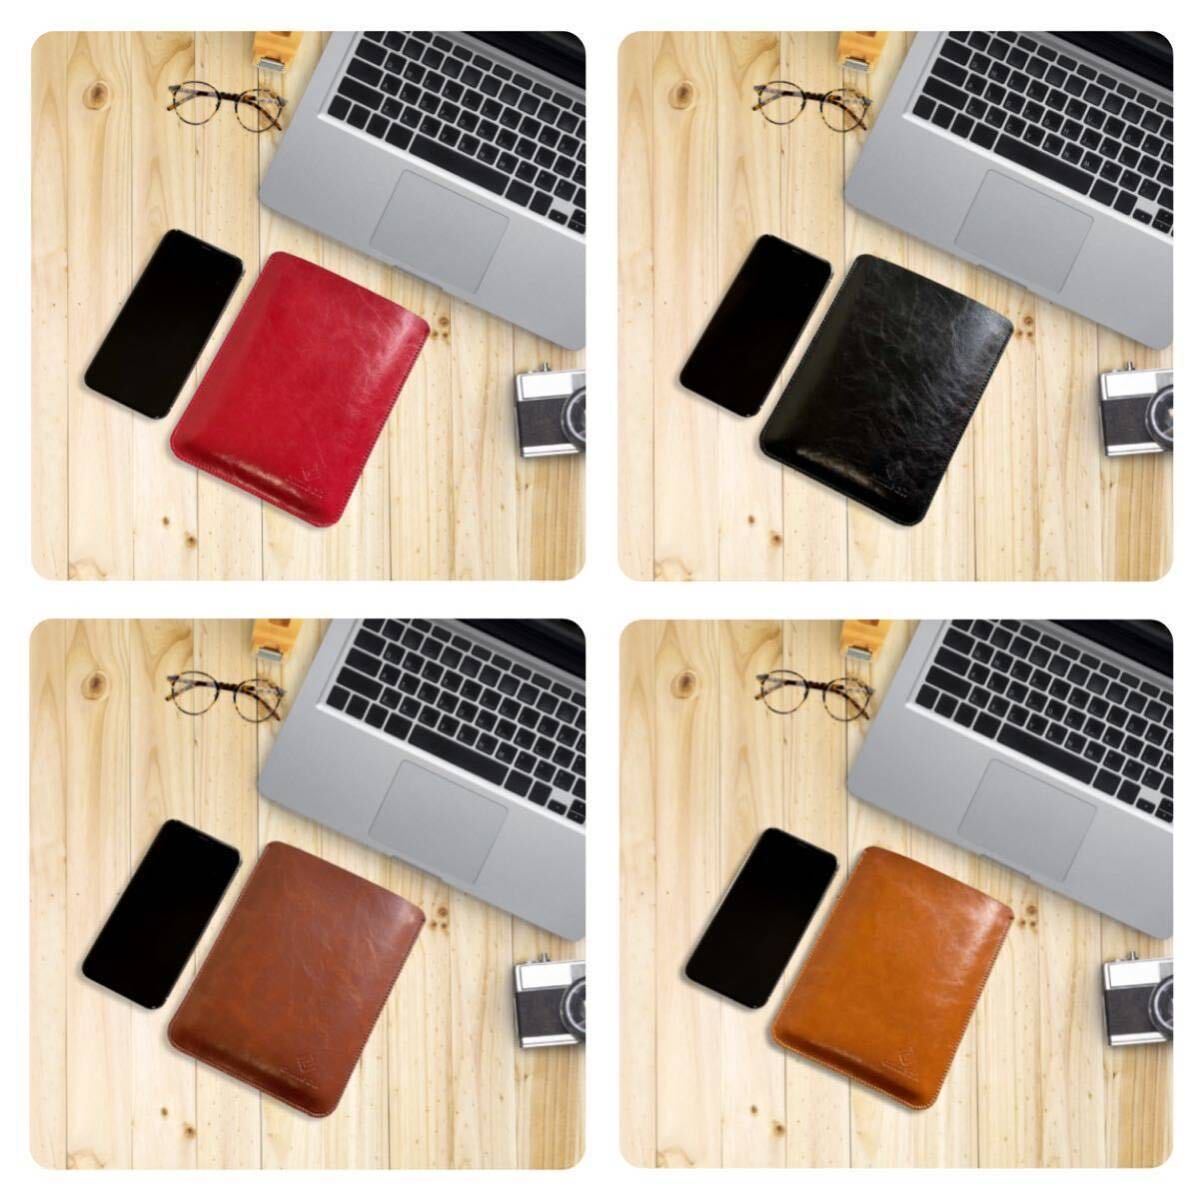 CM Tech Kindle leather case thin type super light weight PU leather cover 